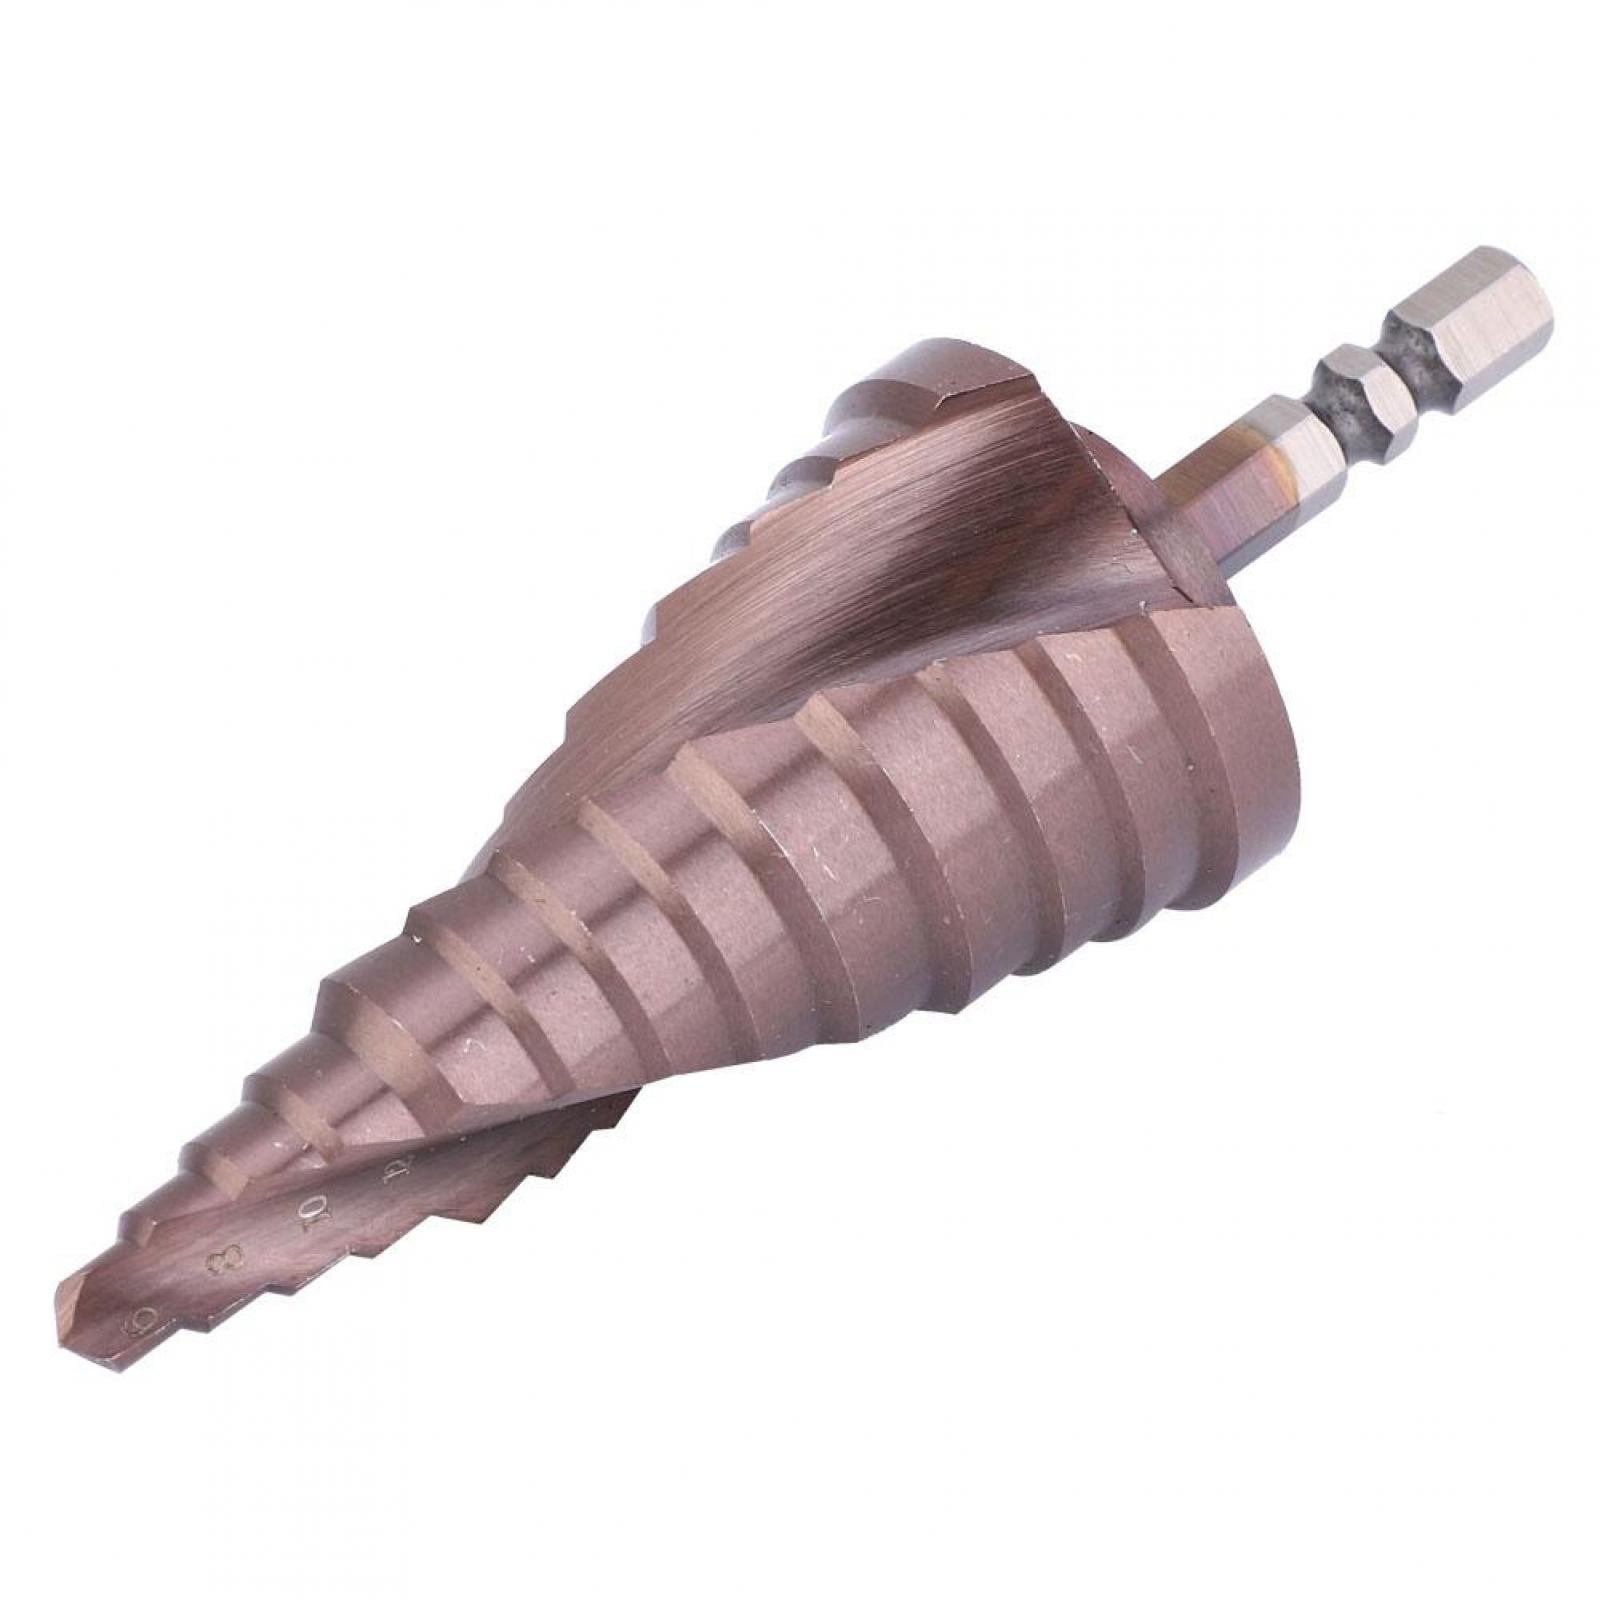 for Perforating Various Materials Deburring Step Drill Bit 6-35 Convenient to Use High Strength No Need for Center Punch Cobalt Coating Drill 